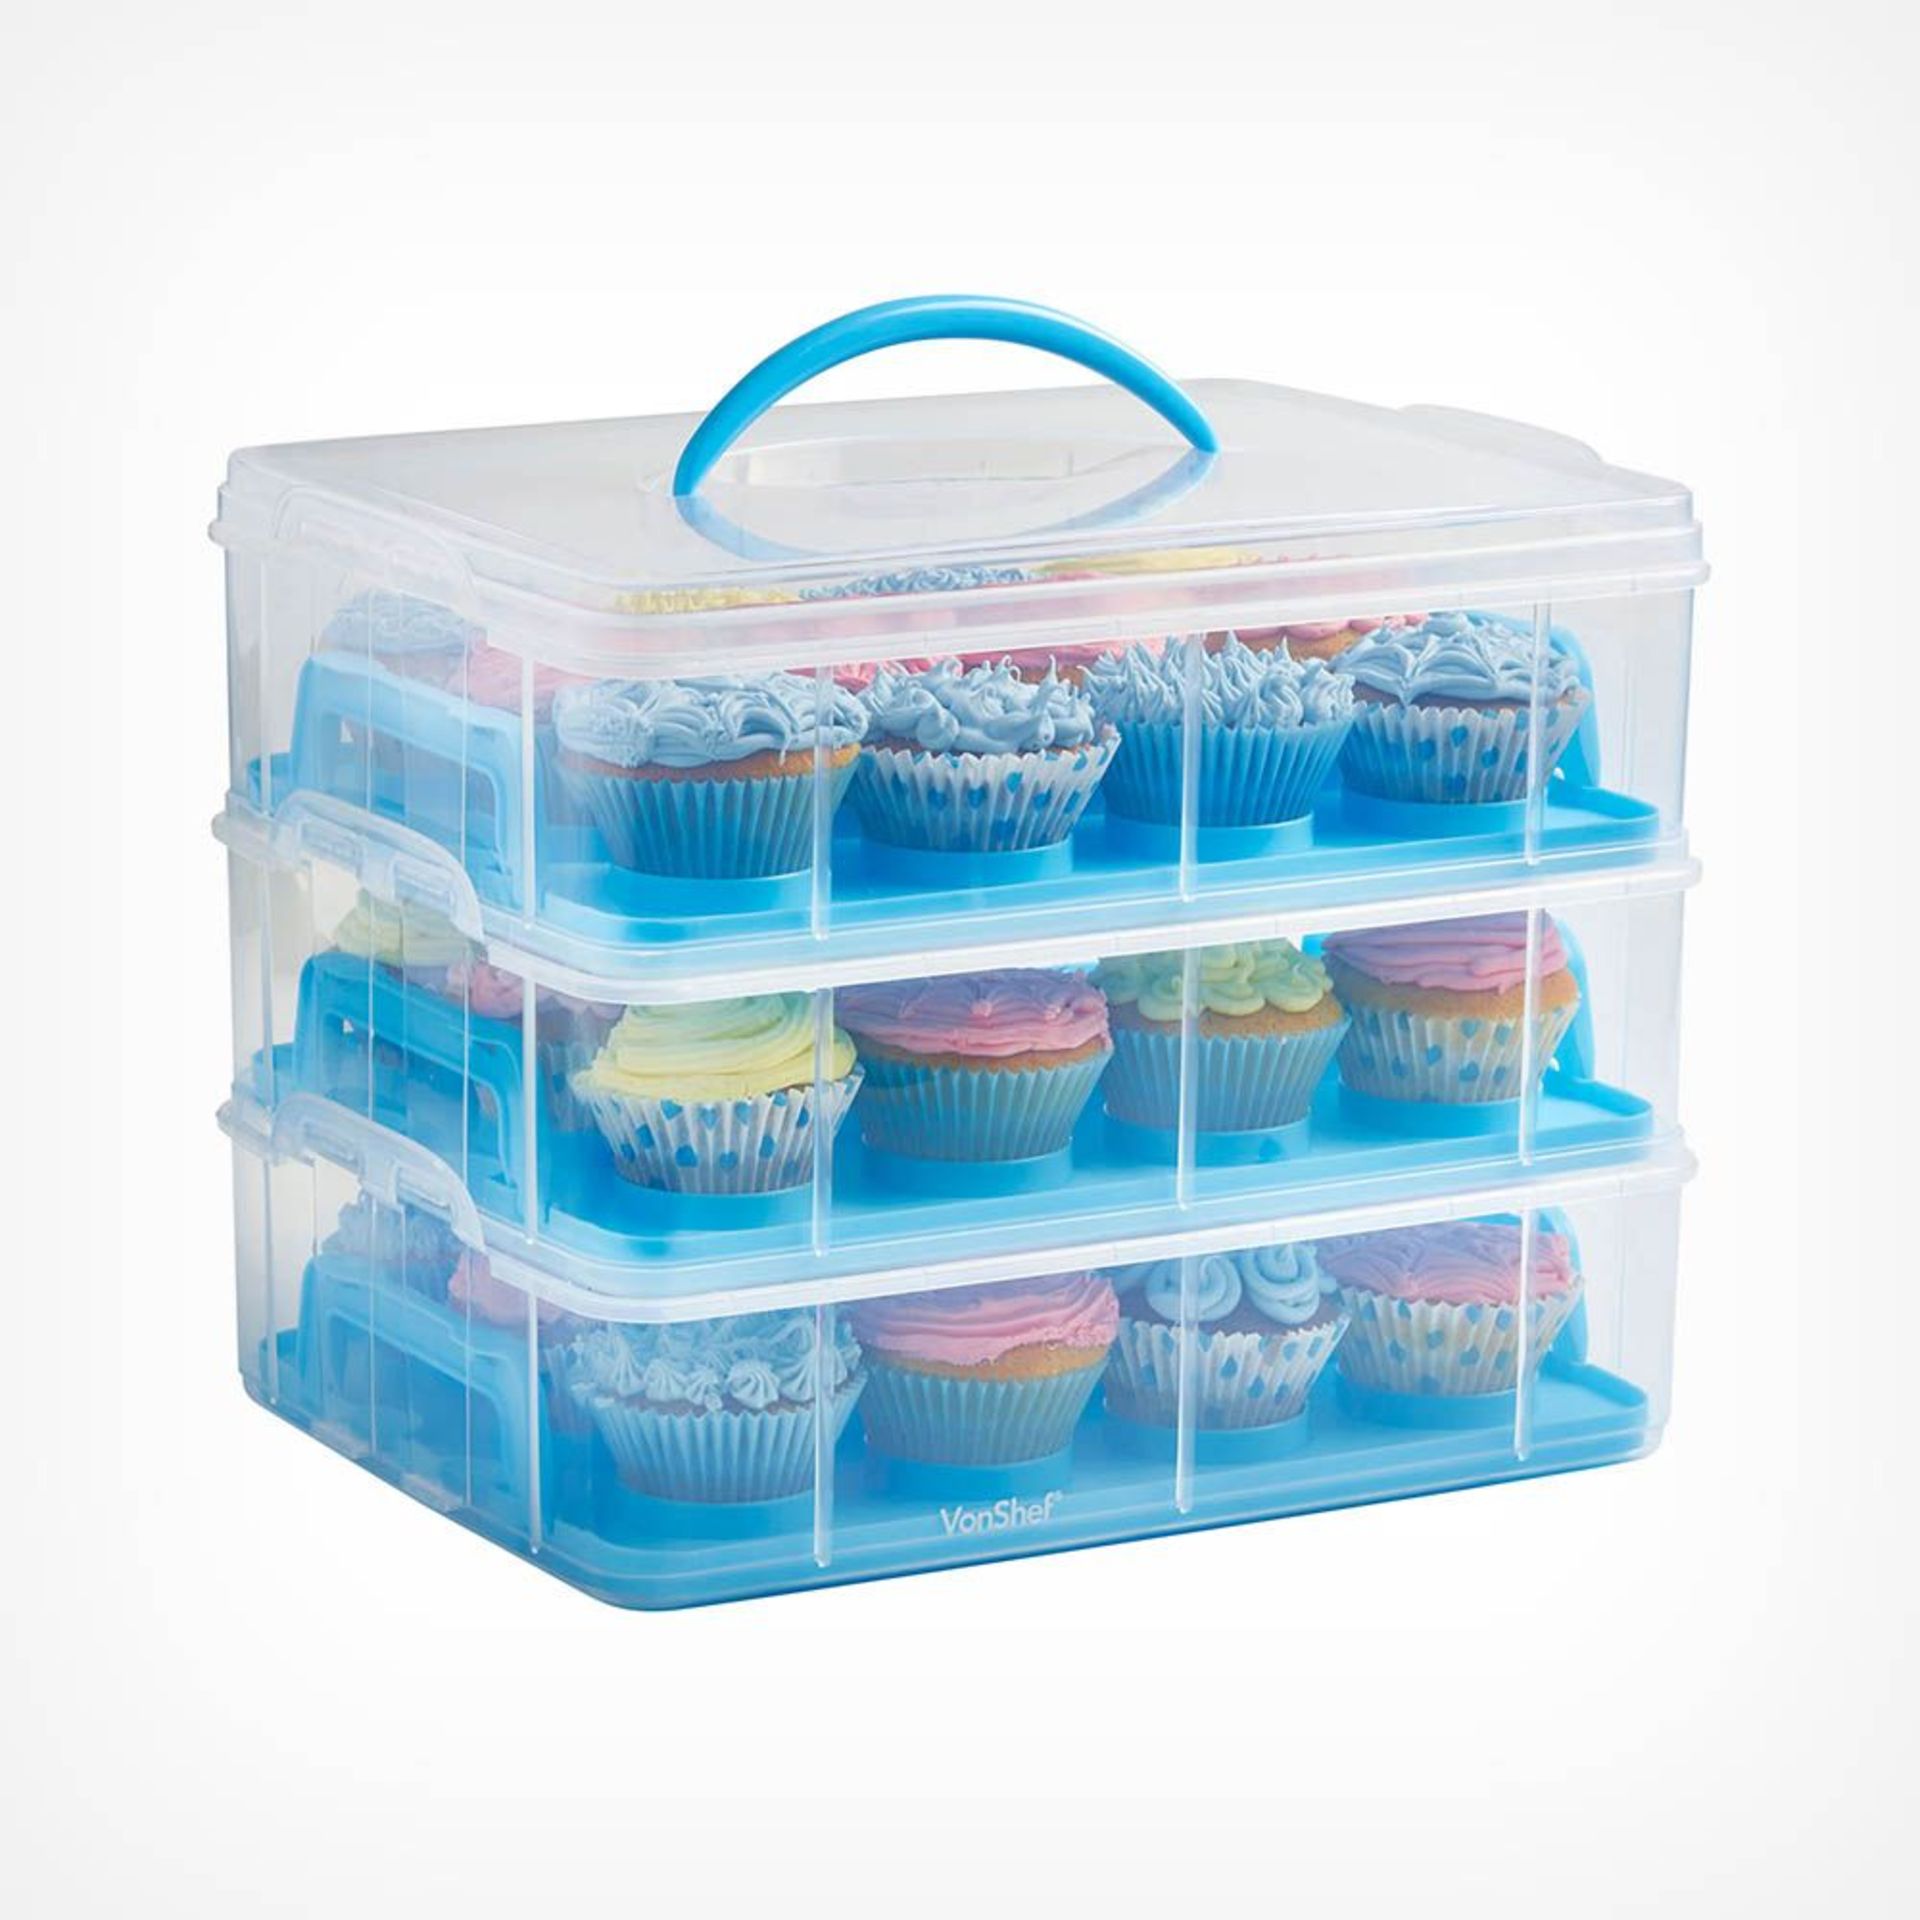 3 Tier Cupcake Carrier Blue. With this extremely handy carrier, you can store and transport up to 36